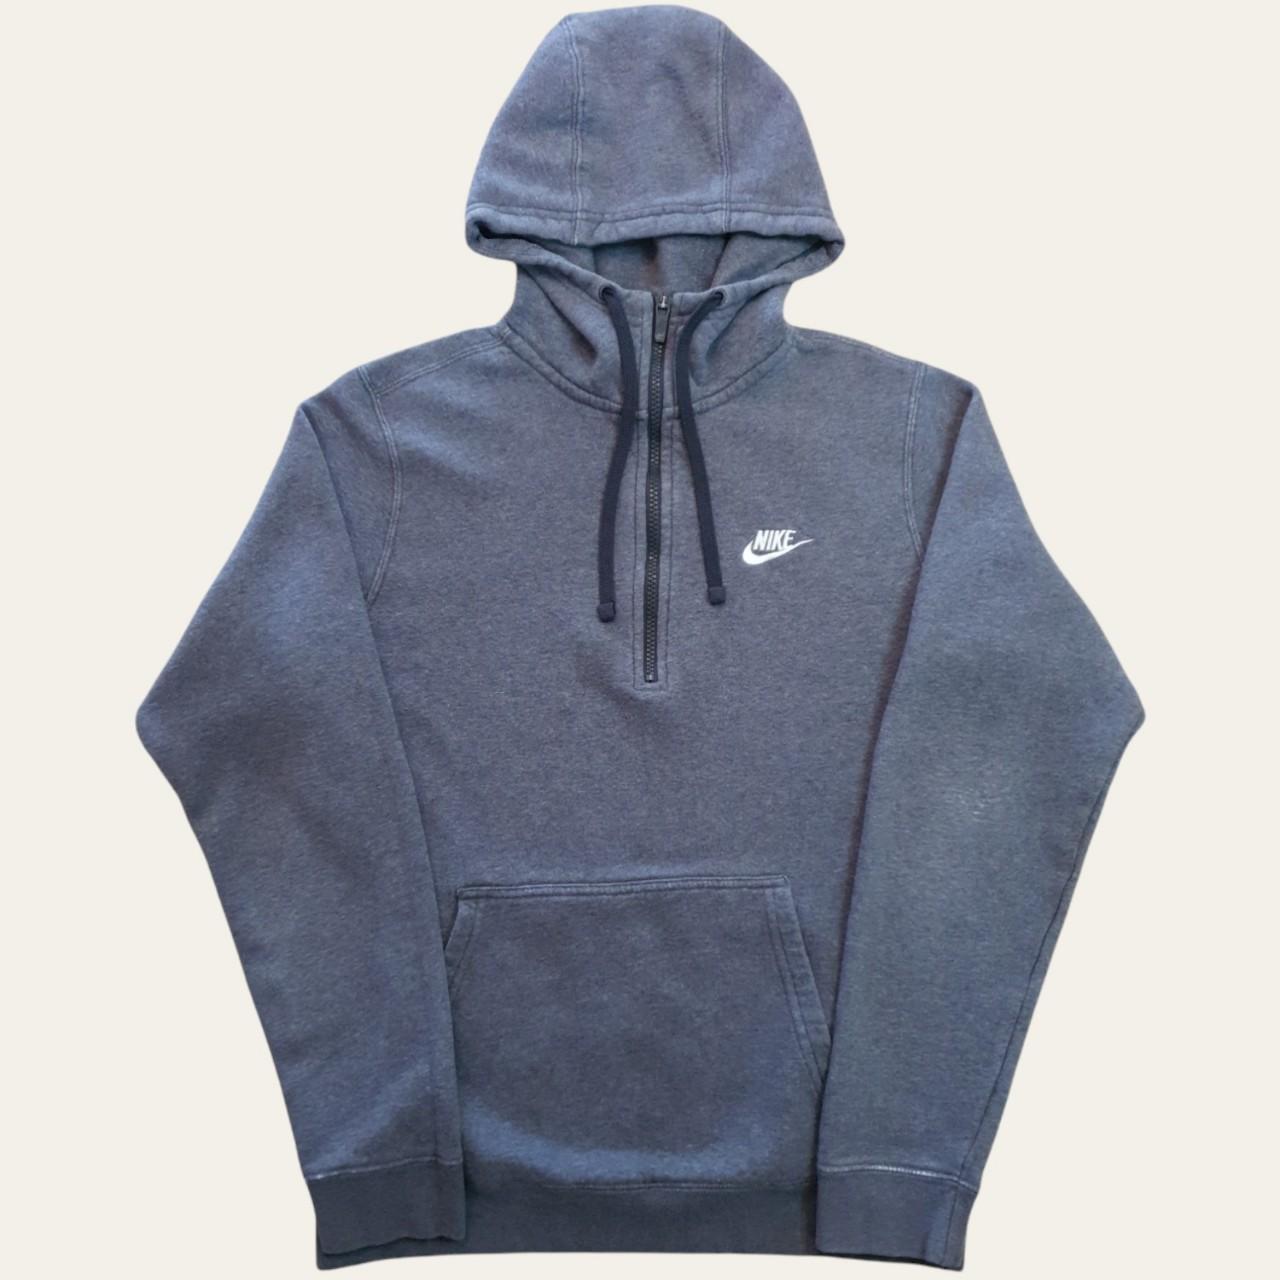 Nike quarter zip hoodie in grey with embroidered... - Depop